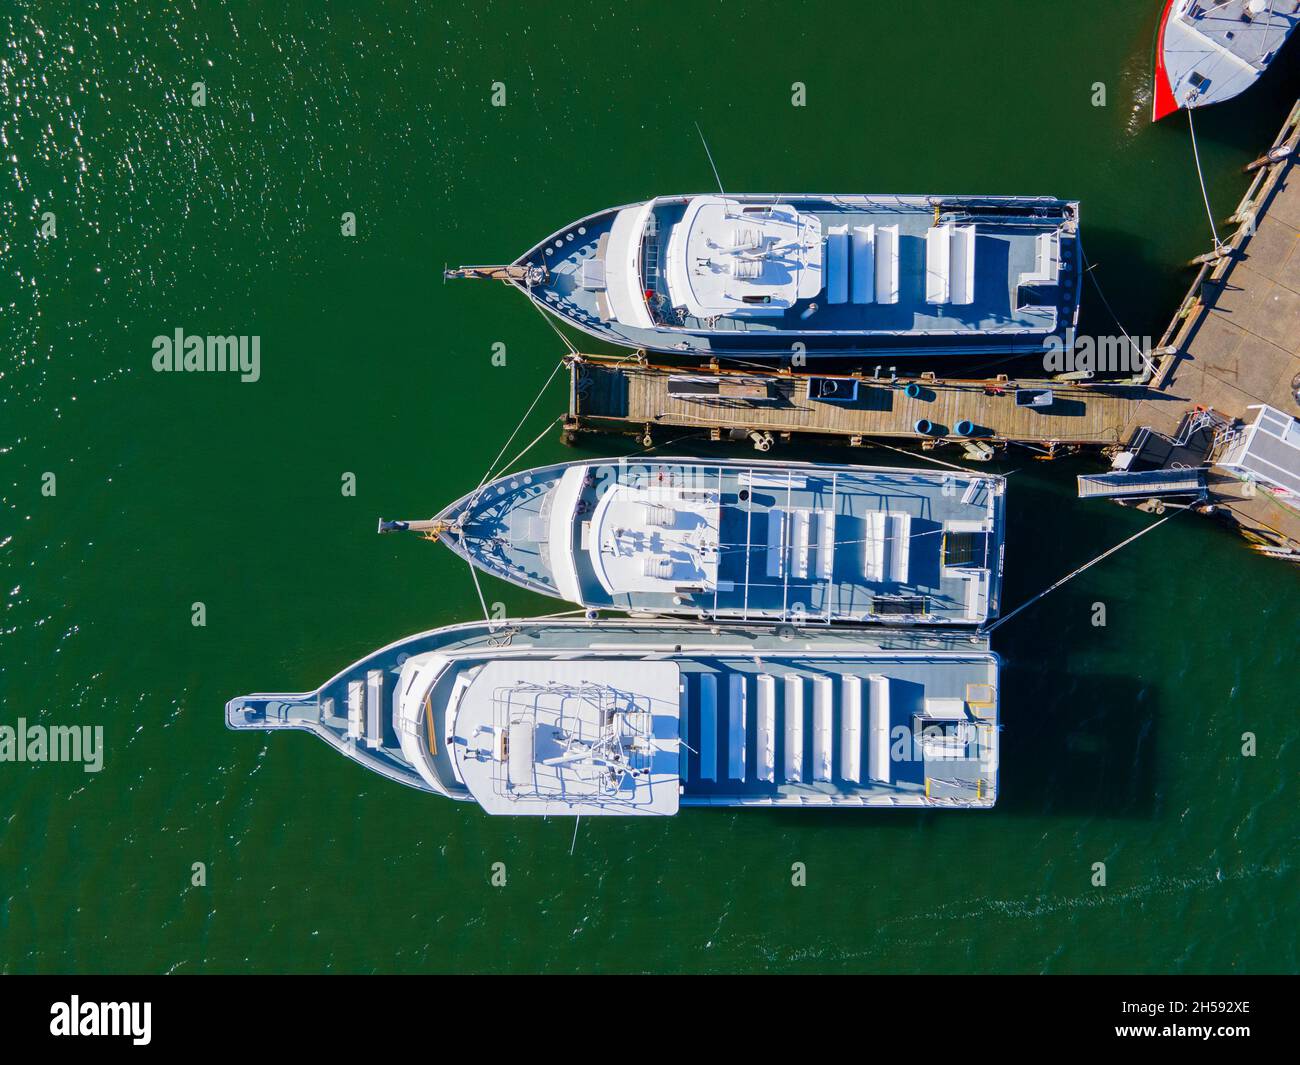 Top view of Whale watch ship docked at Town Wharf at historic town center of Plymouth, Massachusetts MA, USA. Stock Photo